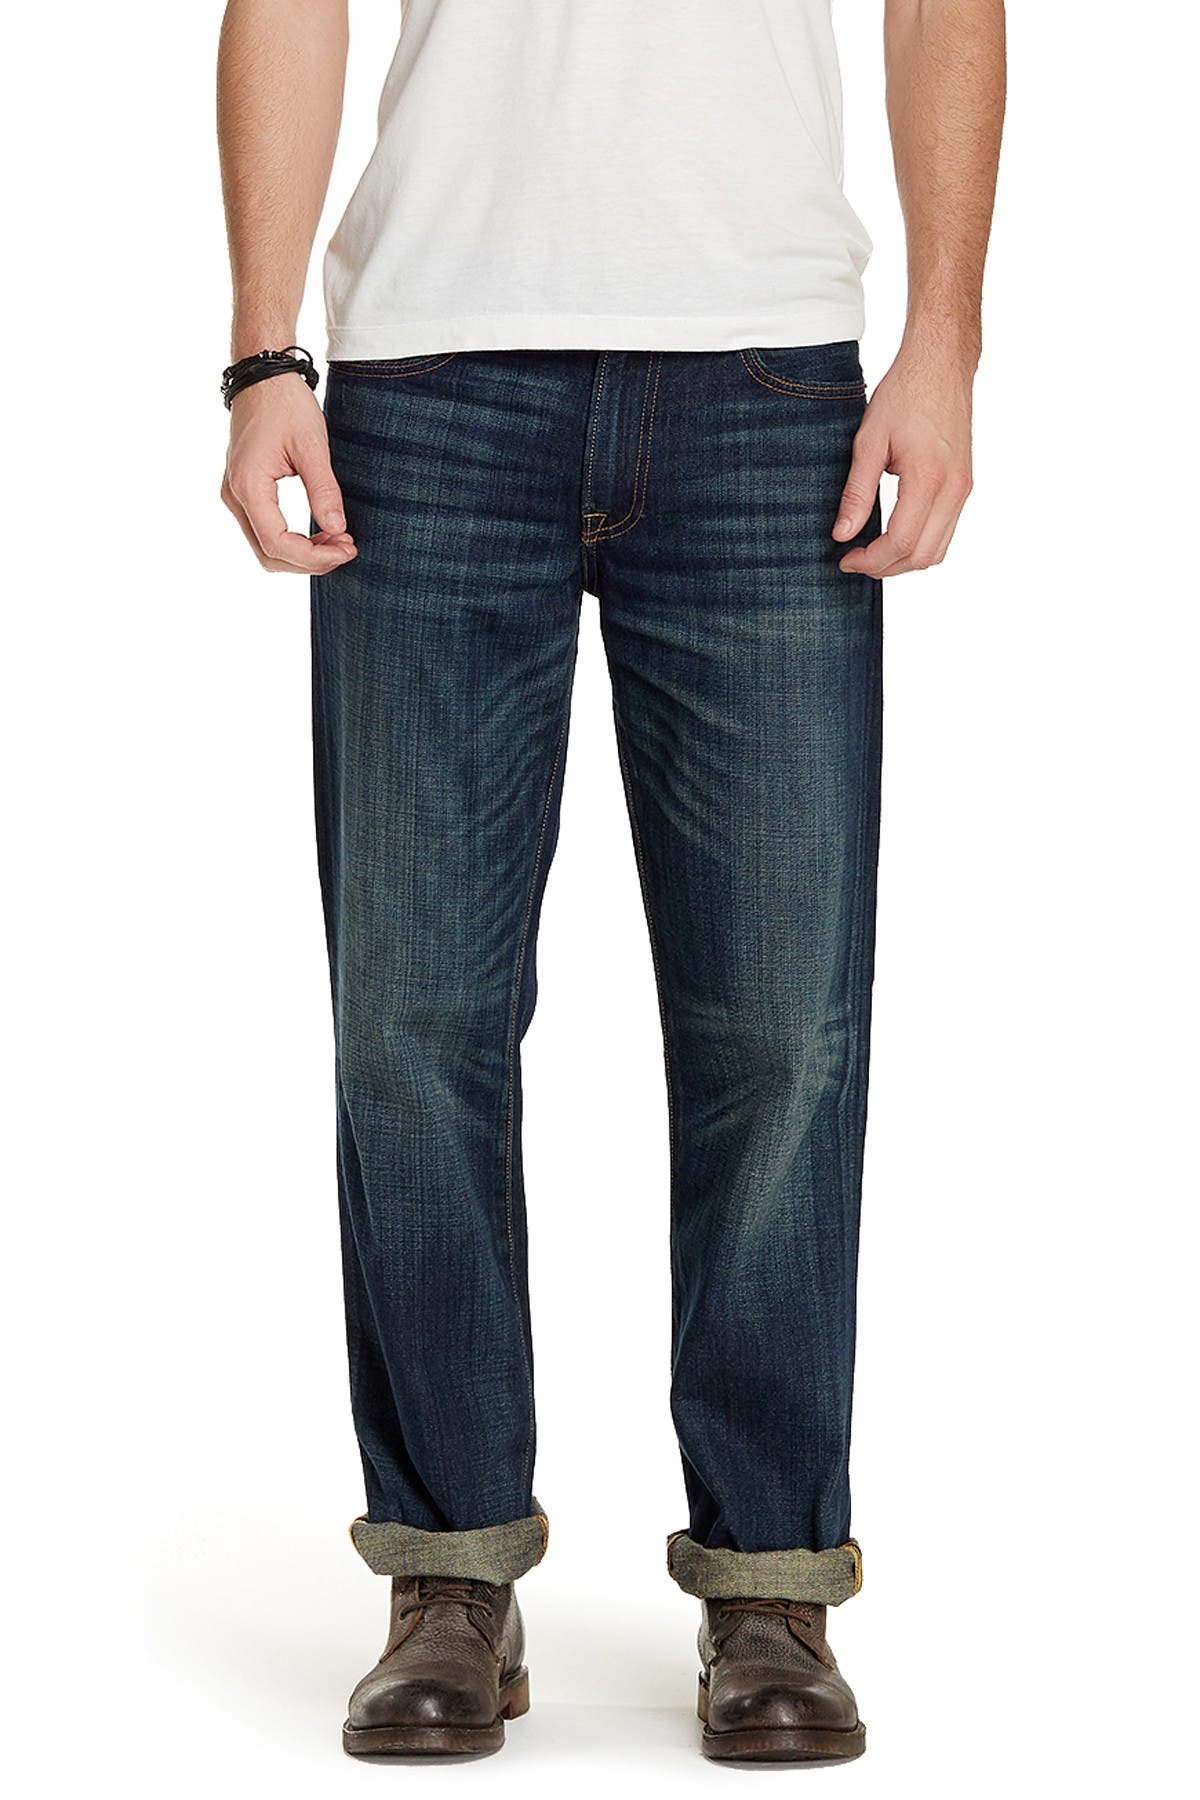 mens lucky jeans 361 vintage straight